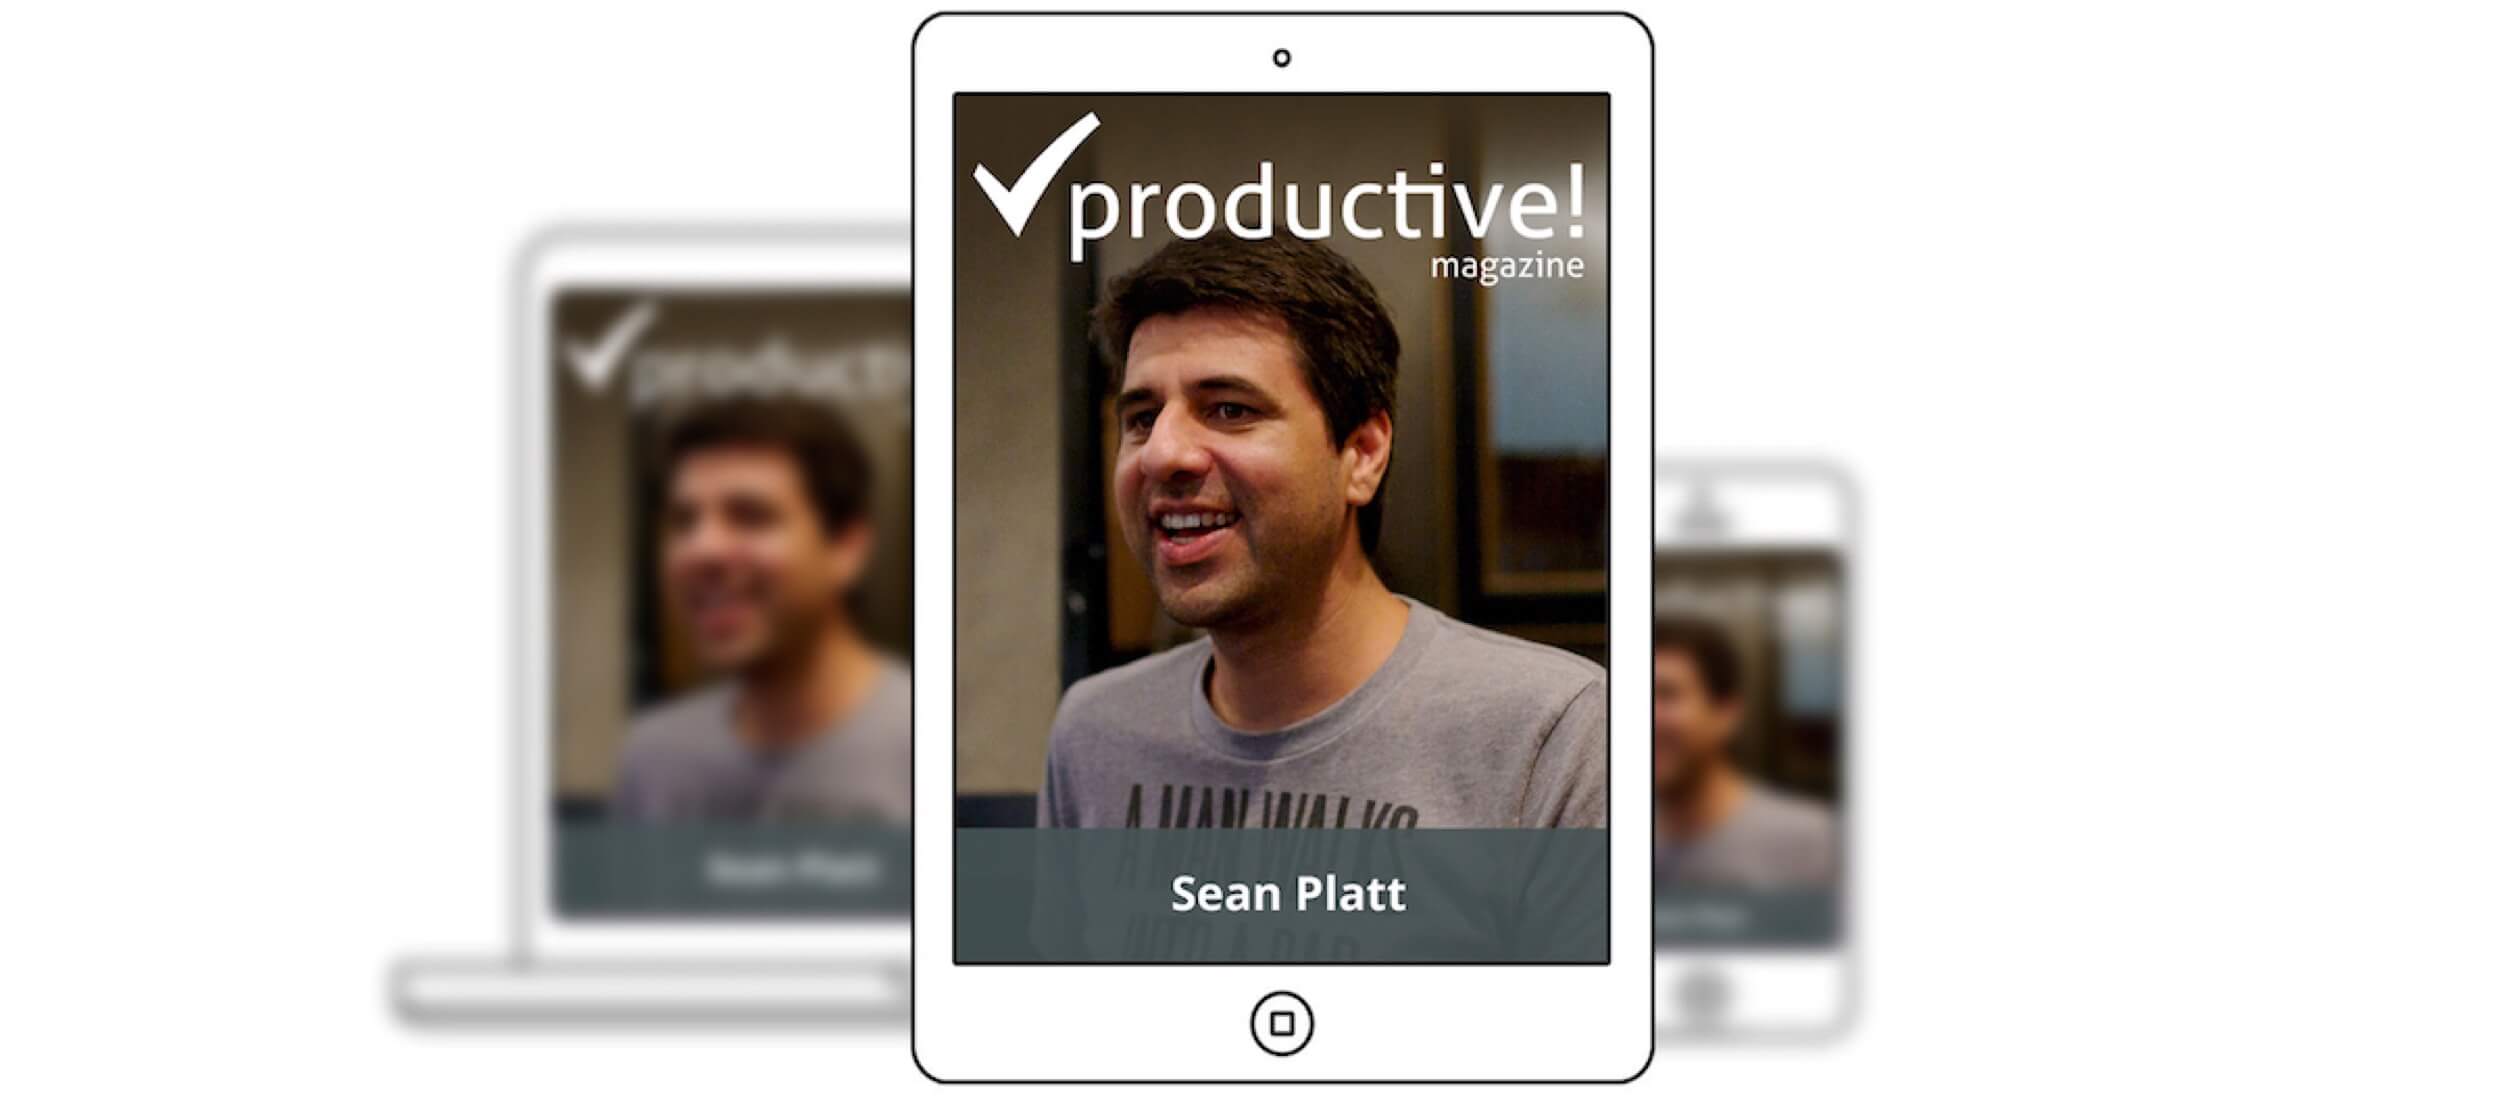 Get focused in 5 simple steps - intro to Productive! Magazine No.32 with Sean Platt